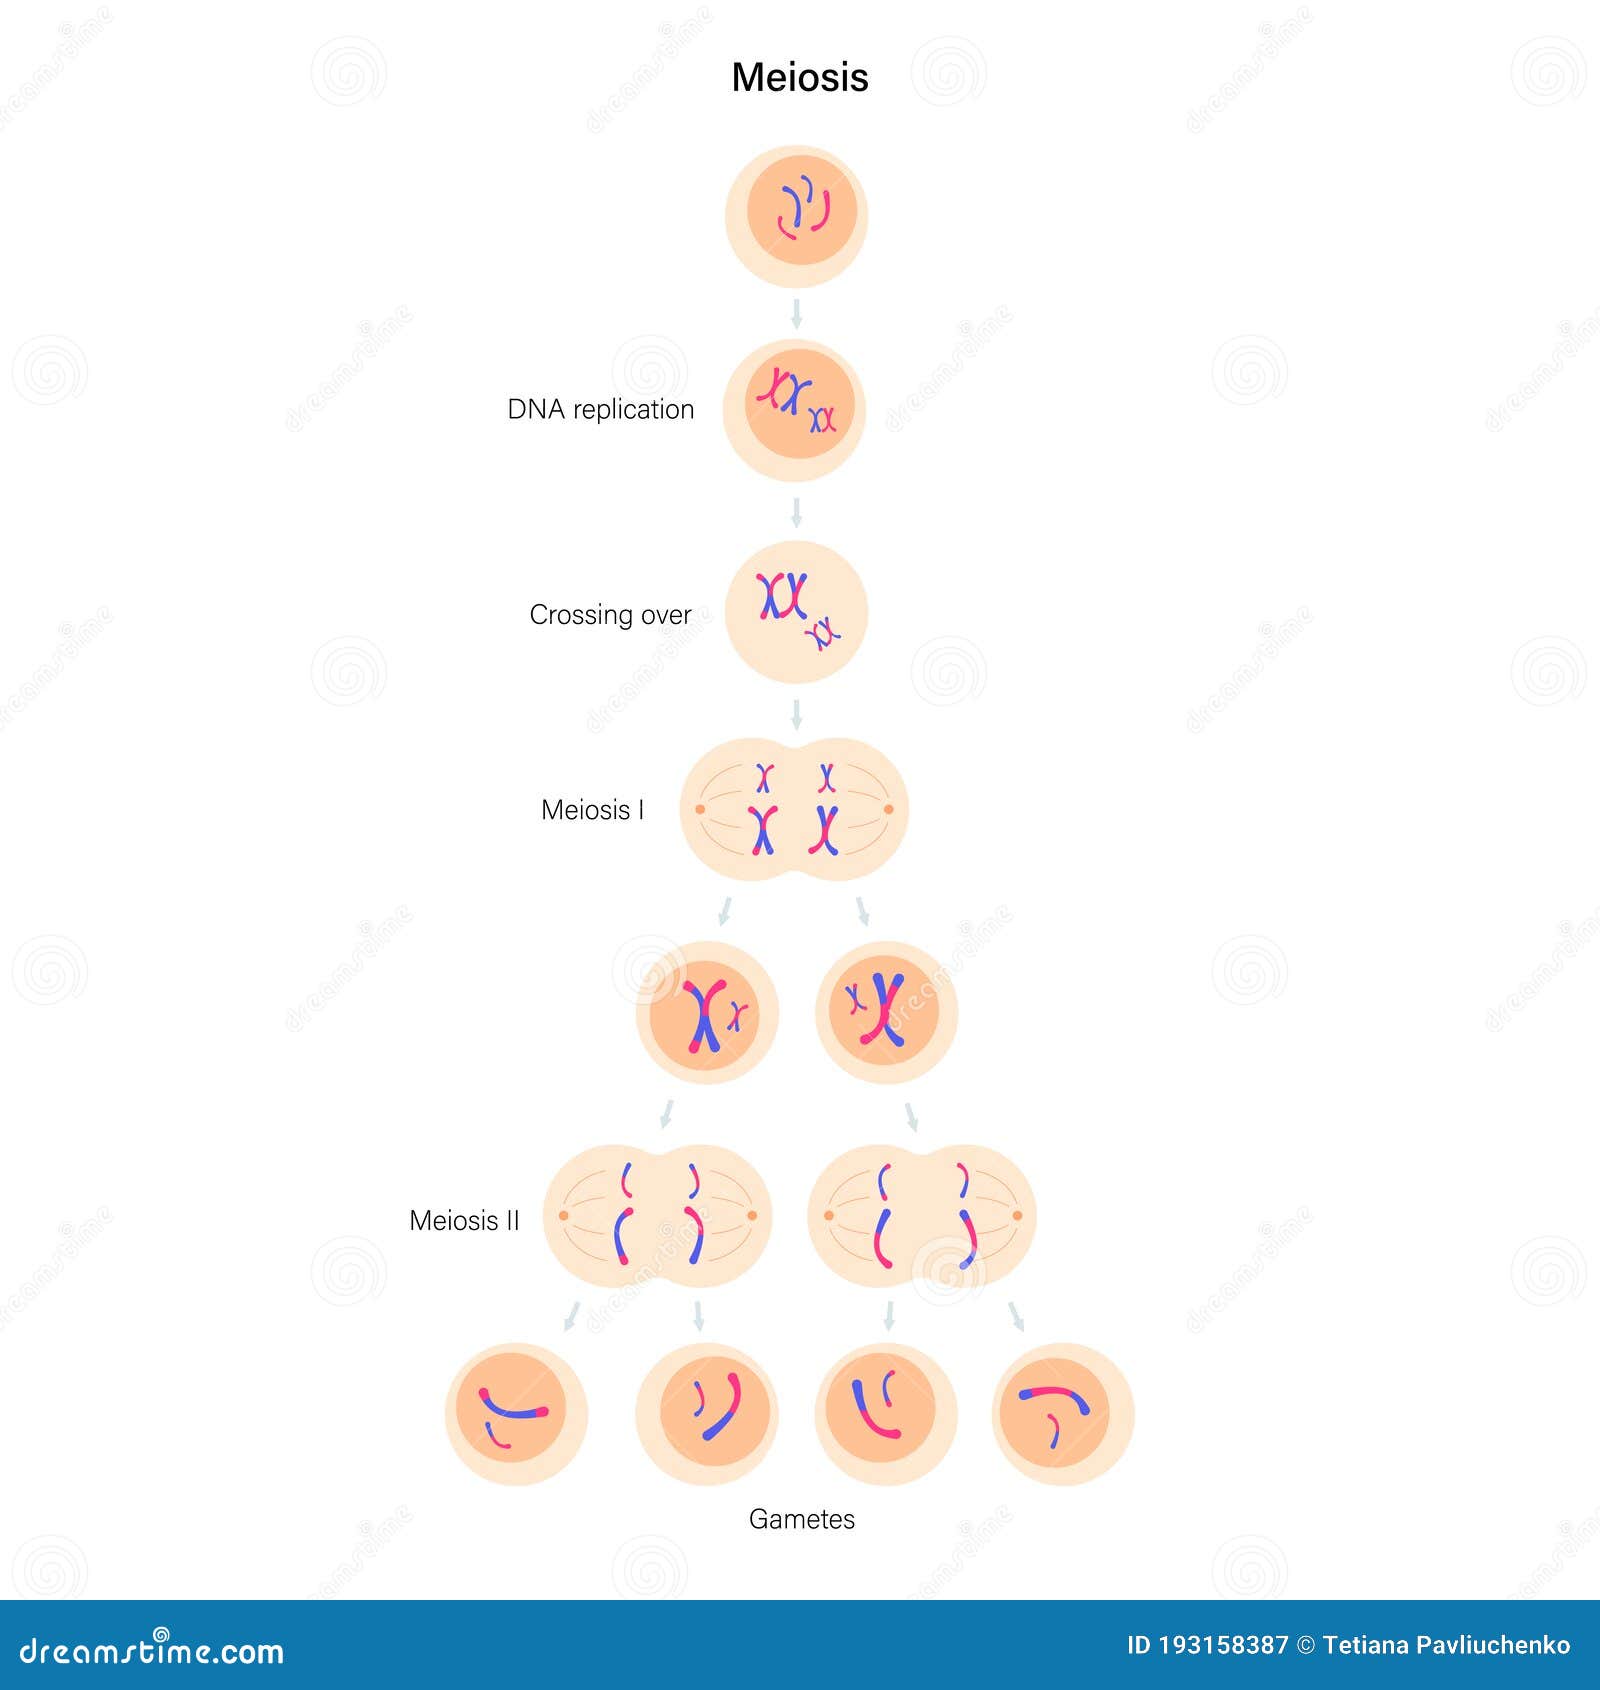 Meiosis cell division stock vector. Illustration of anatomy - 193158387